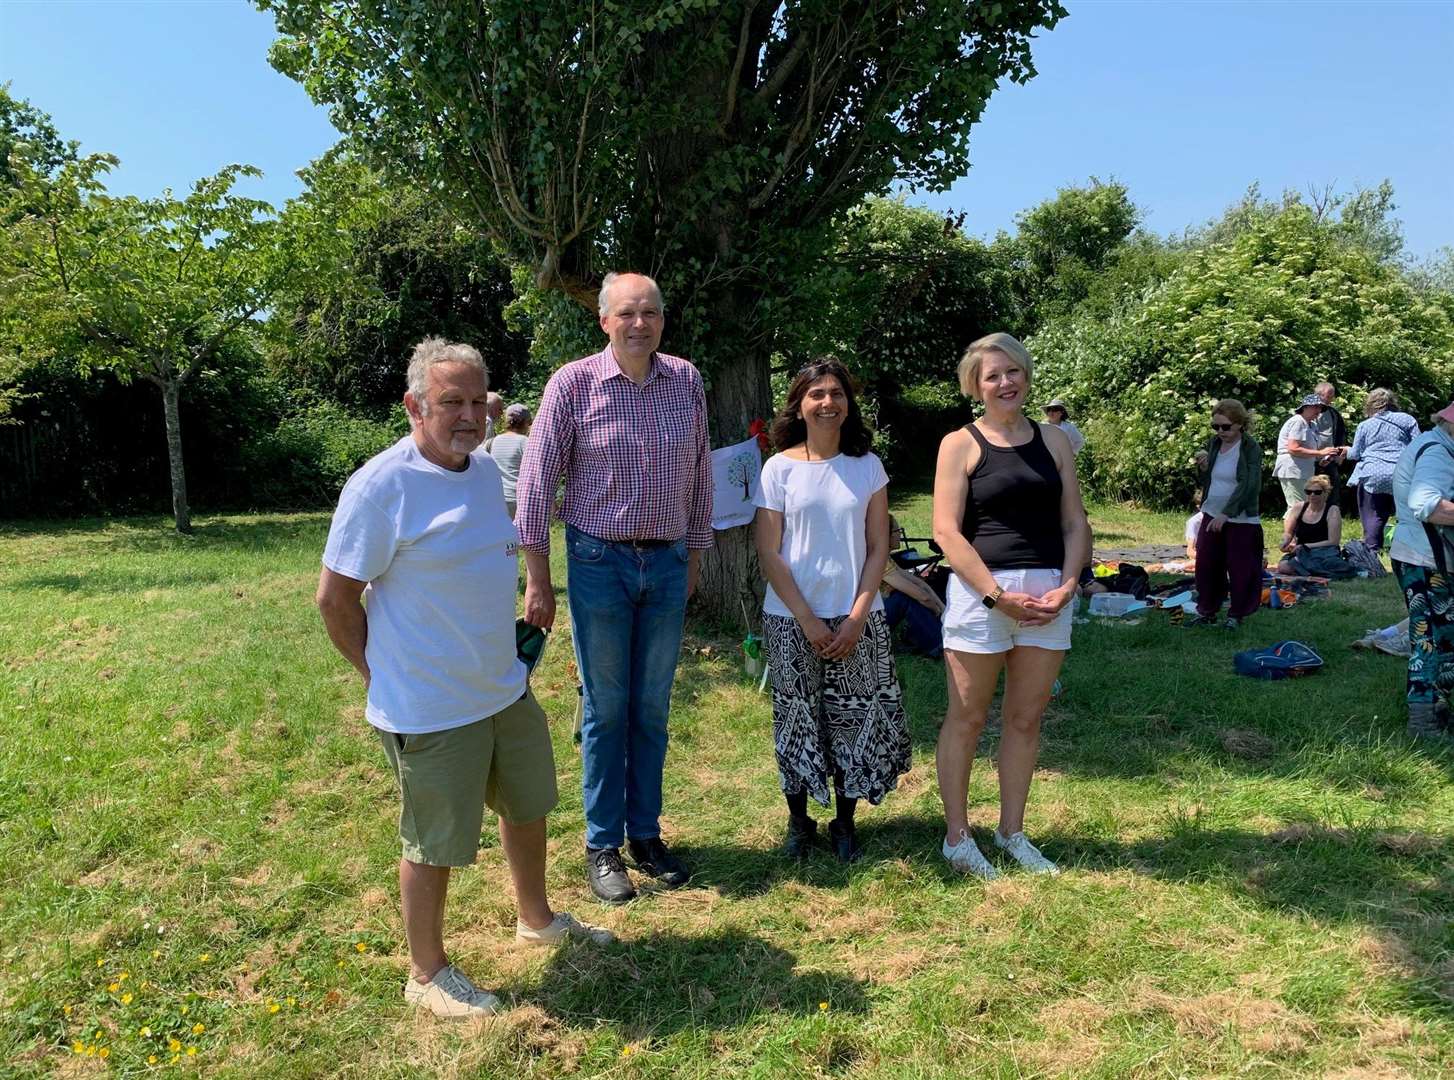 Borough councillors took part in the walk, from left: Andy Bullen, Michael de Whalley, Pallavi Devulapalli and Jo Rust